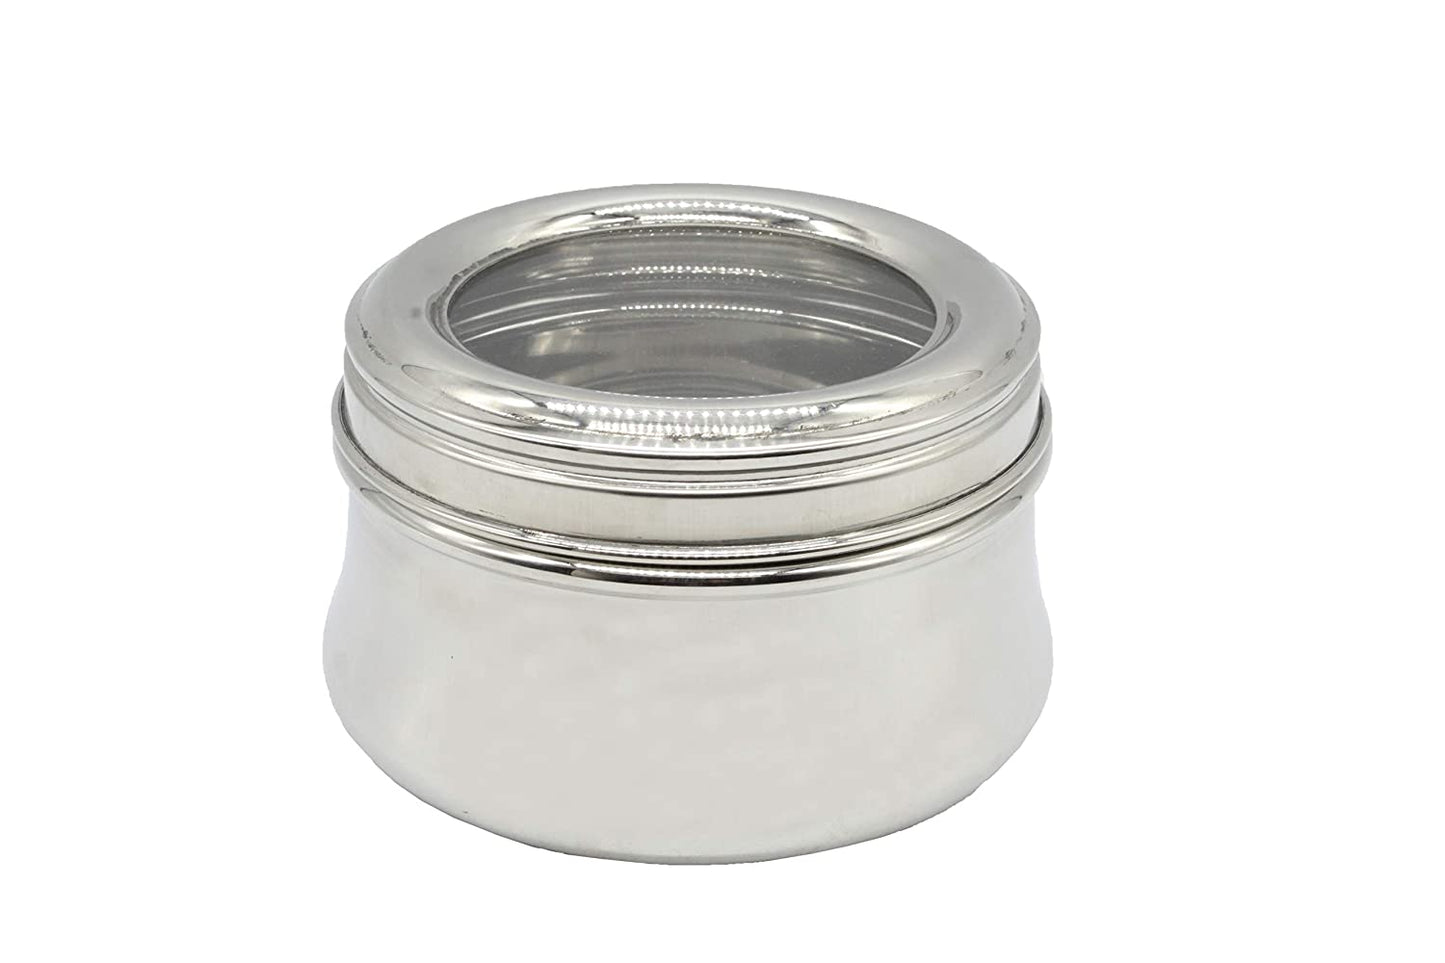 Stainless Steel See Through lid Lily Lunch Box | Dabba (12cm) 600ml - Set of 2Pcs.